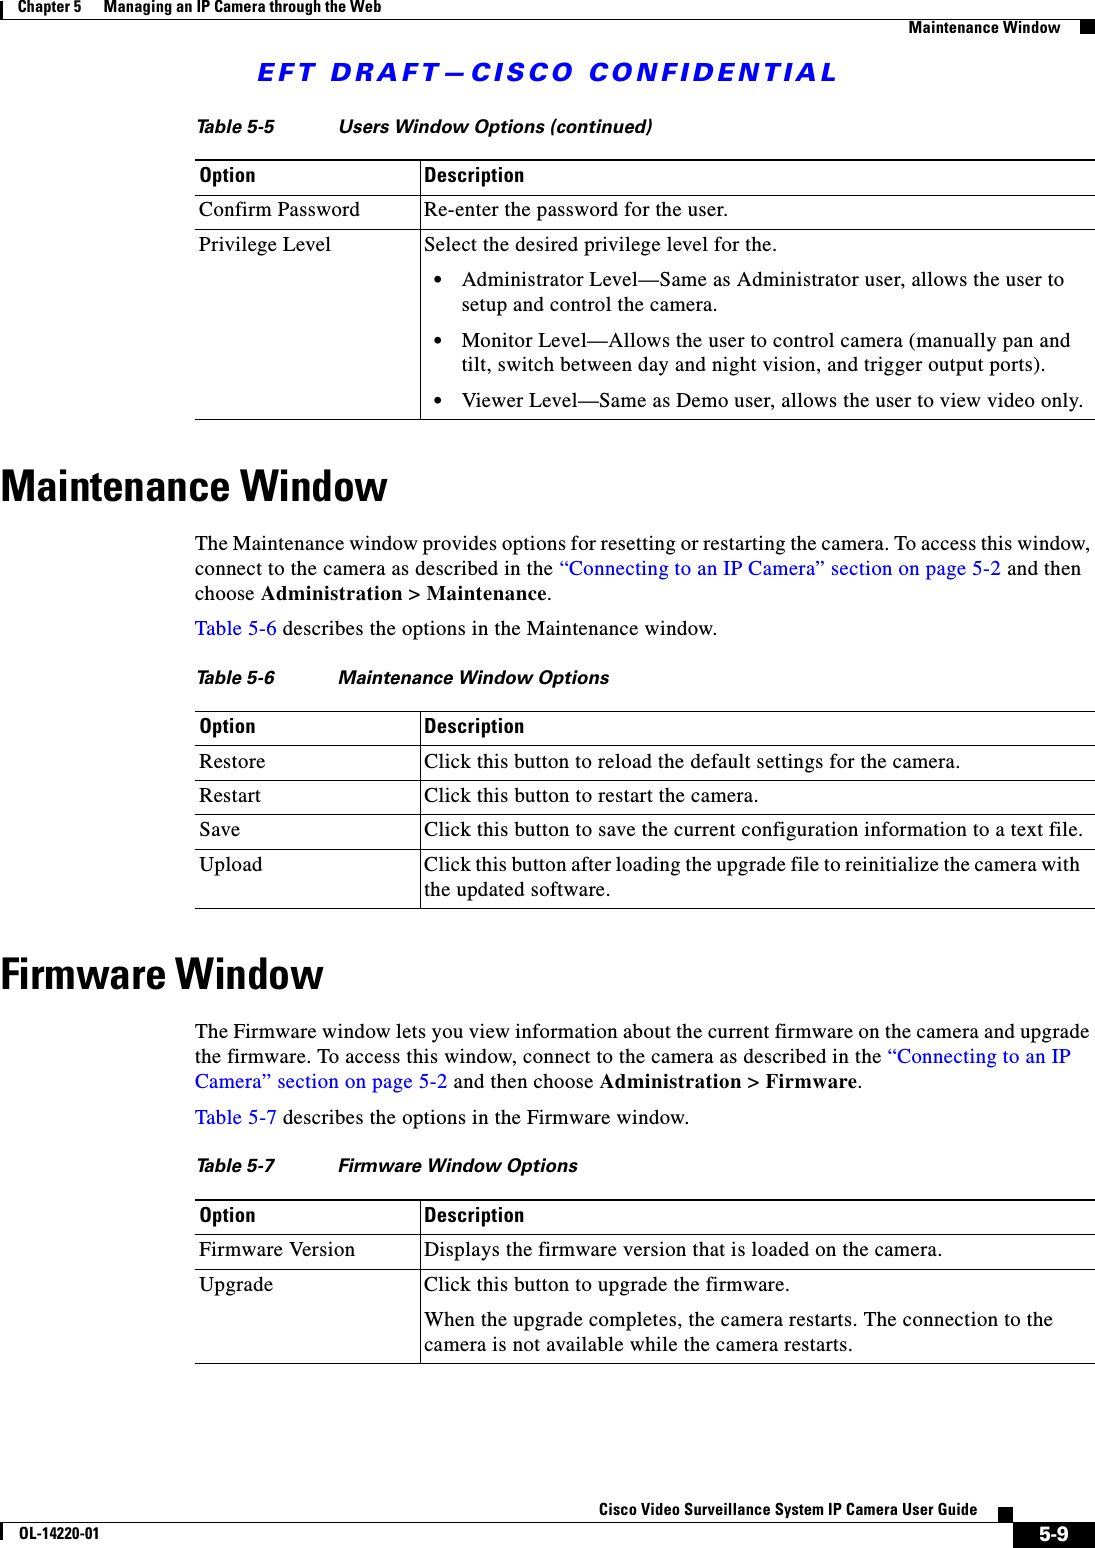 EFT DRAFT—CISCO CONFIDENTIAL5-9Cisco Video Surveillance System IP Camera User GuideOL-14220-01Chapter 5      Managing an IP Camera through the WebMaintenance WindowMaintenance WindowThe Maintenance window provides options for resetting or restarting the camera. To access this window, connect to the camera as described in the “Connecting to an IP Camera” section on page 5-2 and then choose Administration &gt; Maintenance.Table 5-6 describes the options in the Maintenance window.Firmware WindowThe Firmware window lets you view information about the current firmware on the camera and upgrade the firmware. To access this window, connect to the camera as described in the “Connecting to an IP Camera” section on page 5-2 and then choose Administration &gt; Firmware.Table 5-7 describes the options in the Firmware window.Confirm Password Re-enter the password for the user.Privilege Level Select the desired privilege level for the. •Administrator Level—Same as Administrator user, allows the user to setup and control the camera. •Monitor Level—Allows the user to control camera (manually pan and tilt, switch between day and night vision, and trigger output ports). •Viewer Level—Same as Demo user, allows the user to view video only.Table 5-5 Users Window Options (continued)Option DescriptionTable 5-6 Maintenance Window OptionsOption DescriptionRestore Click this button to reload the default settings for the camera.Restart  Click this button to restart the camera.Save  Click this button to save the current configuration information to a text file.Upload Click this button after loading the upgrade file to reinitialize the camera with the updated software.Table 5-7 Firmware Window OptionsOption DescriptionFirmware Version Displays the firmware version that is loaded on the camera.Upgrade Click this button to upgrade the firmware.When the upgrade completes, the camera restarts. The connection to the camera is not available while the camera restarts.